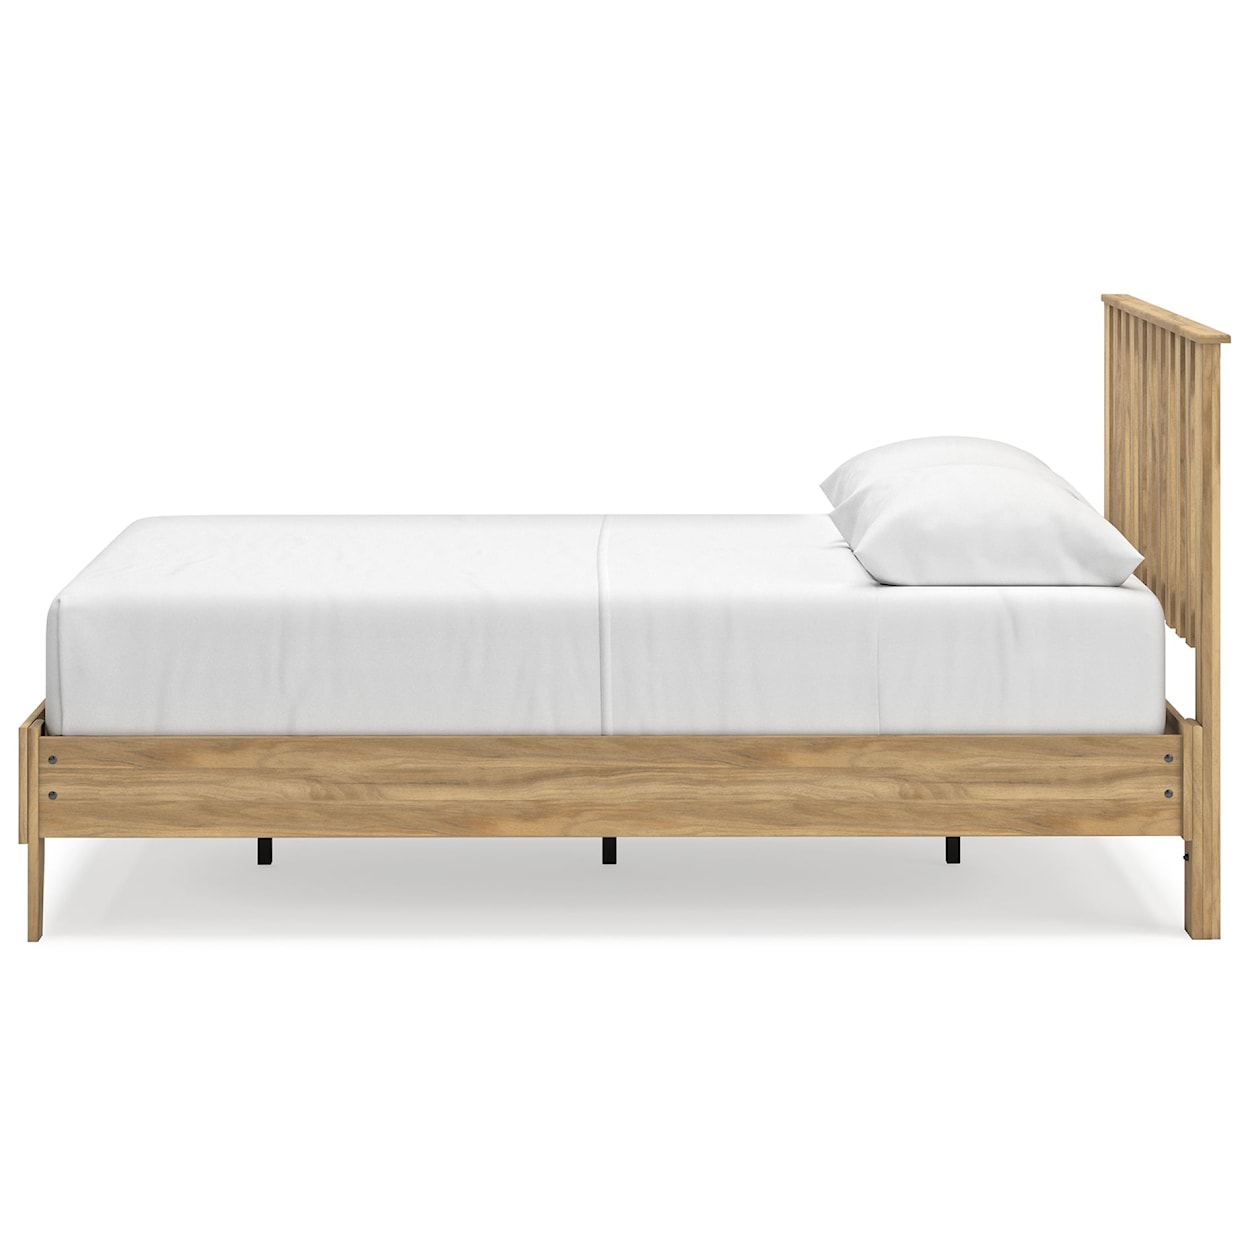 Signature Design by Ashley Bermacy Queen Platform Panel Bed